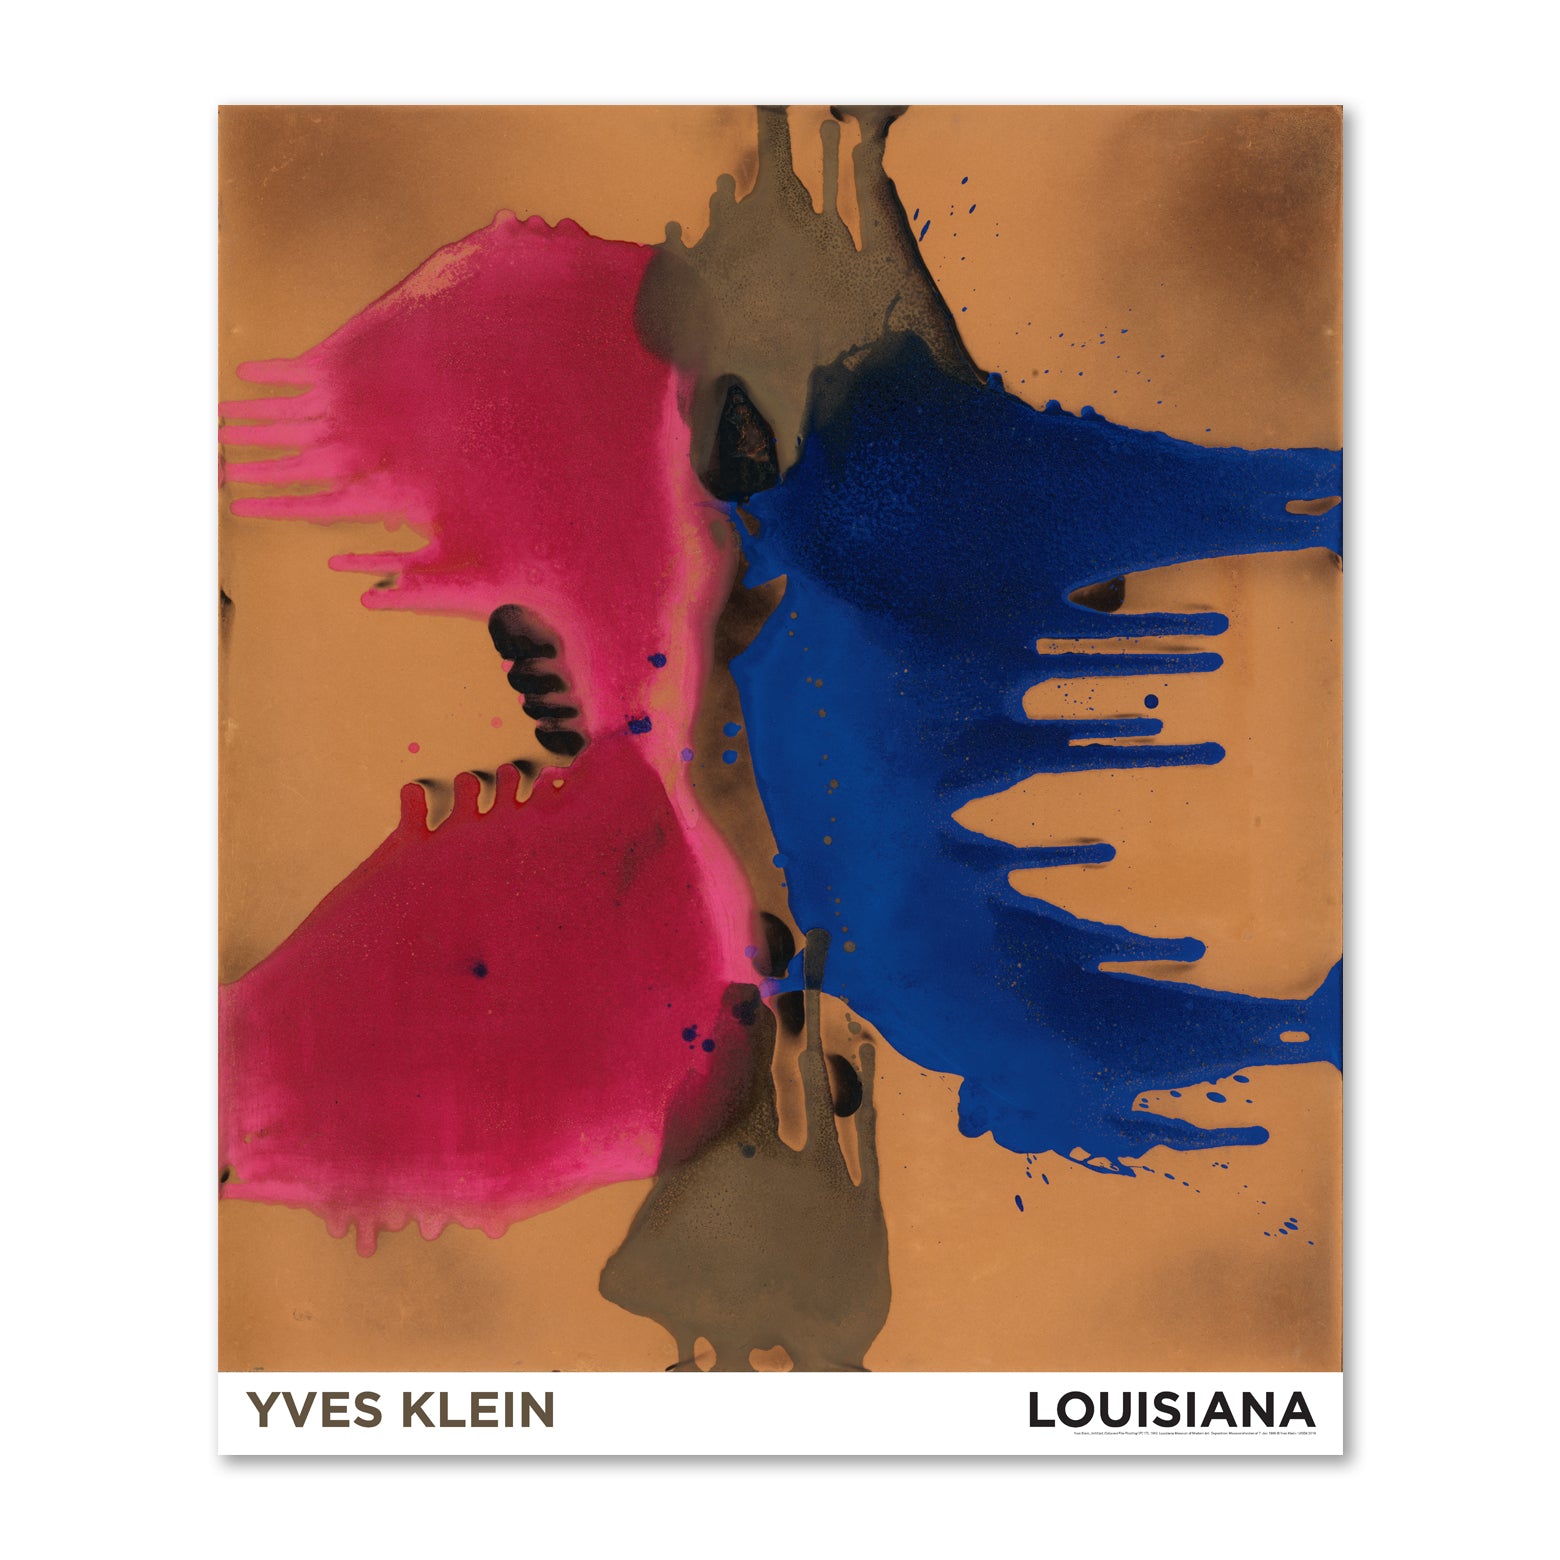 Yves Klein Painted Everything Blue and Wasn't Sorry